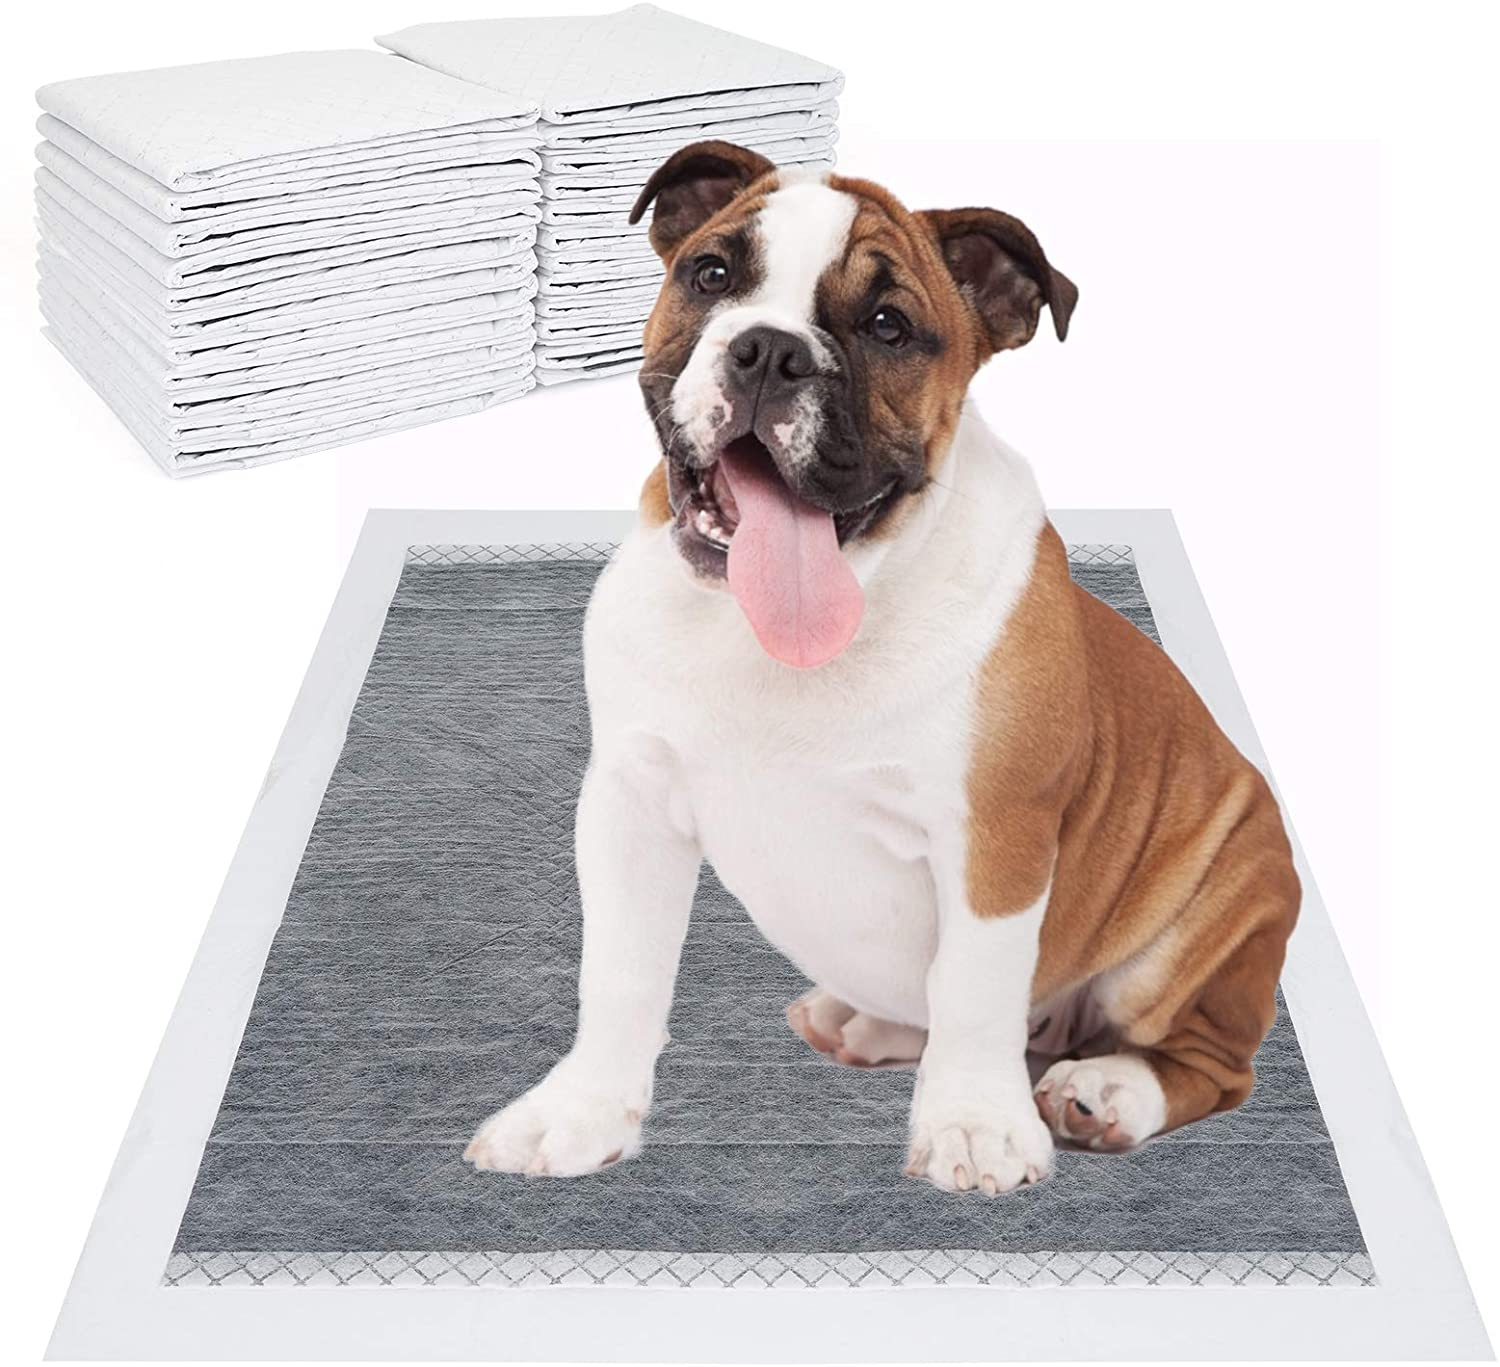 Pet Pads with Leak Protection: Highly Absorbent Puppy Pads for Training or Incontinence, by Pet Pads. Stay Dry & Comfortable with Extra-Large 22 x 23 inch Pads. Ideal for Small to Large Dogs.